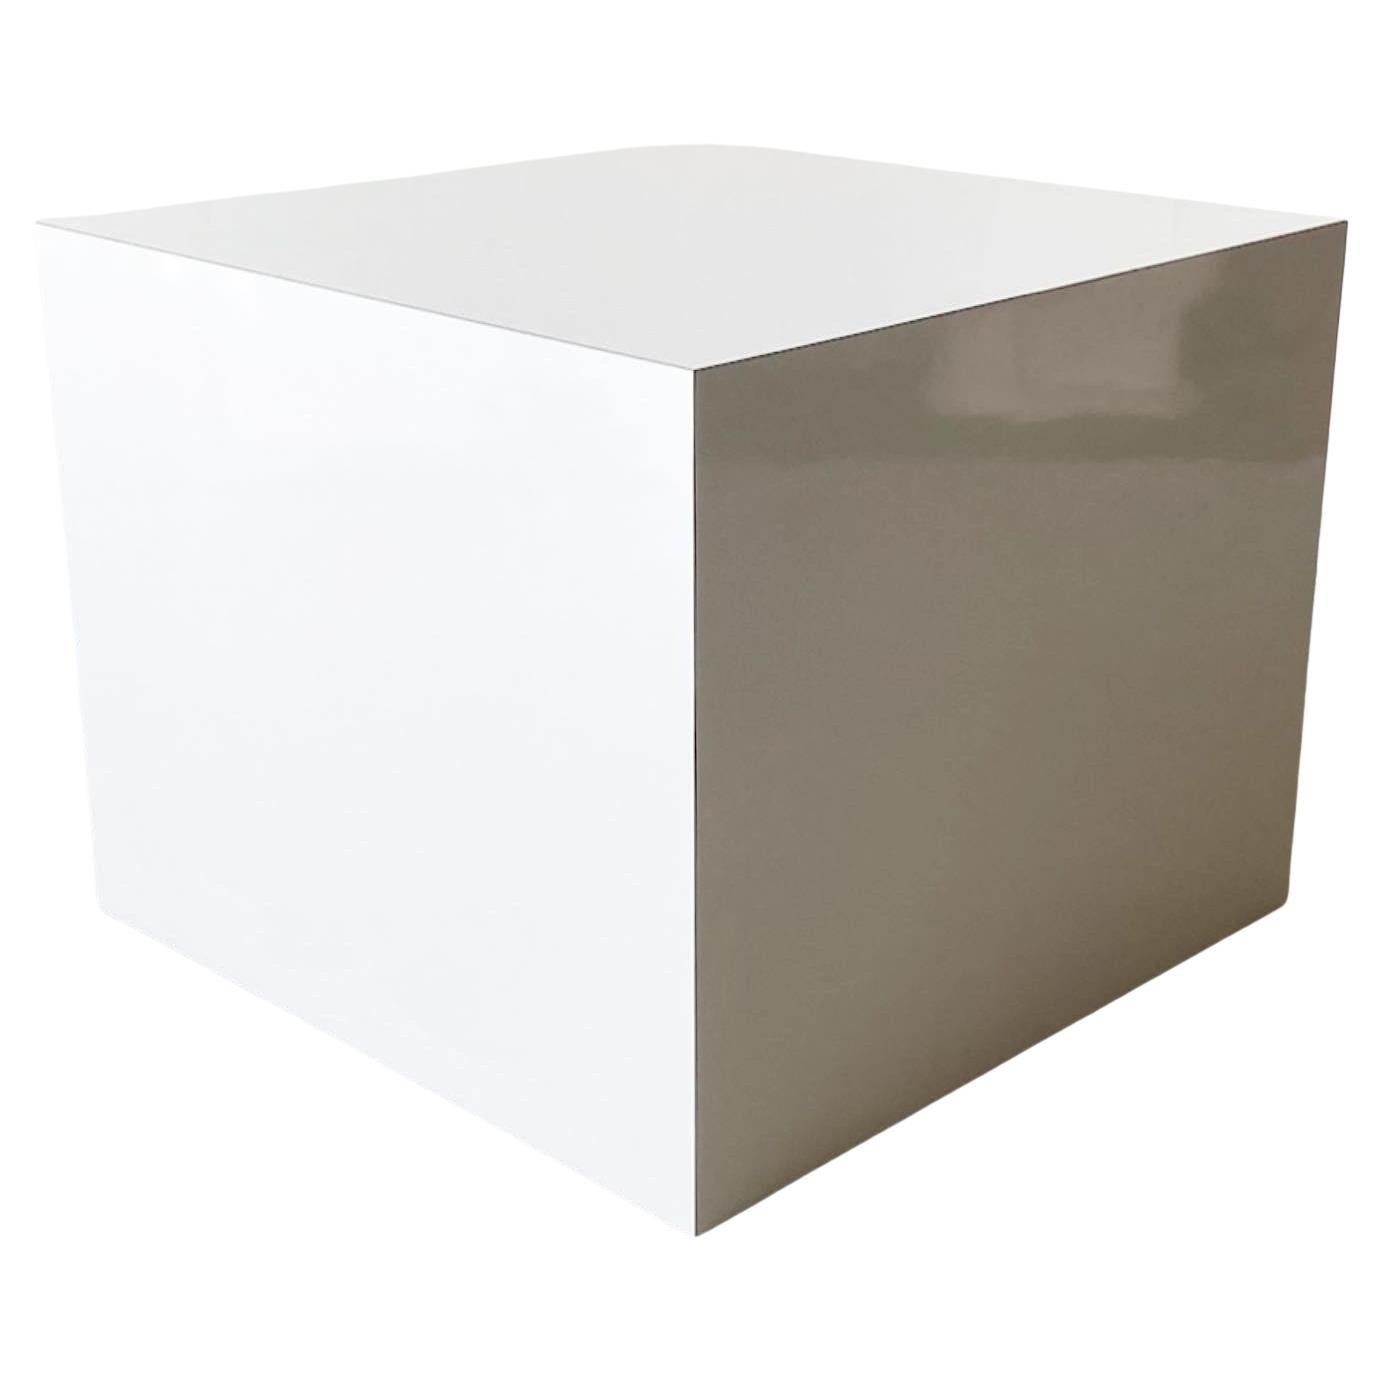 1980s Postmodern Cream Lacquer Laminate Cubic Side Table